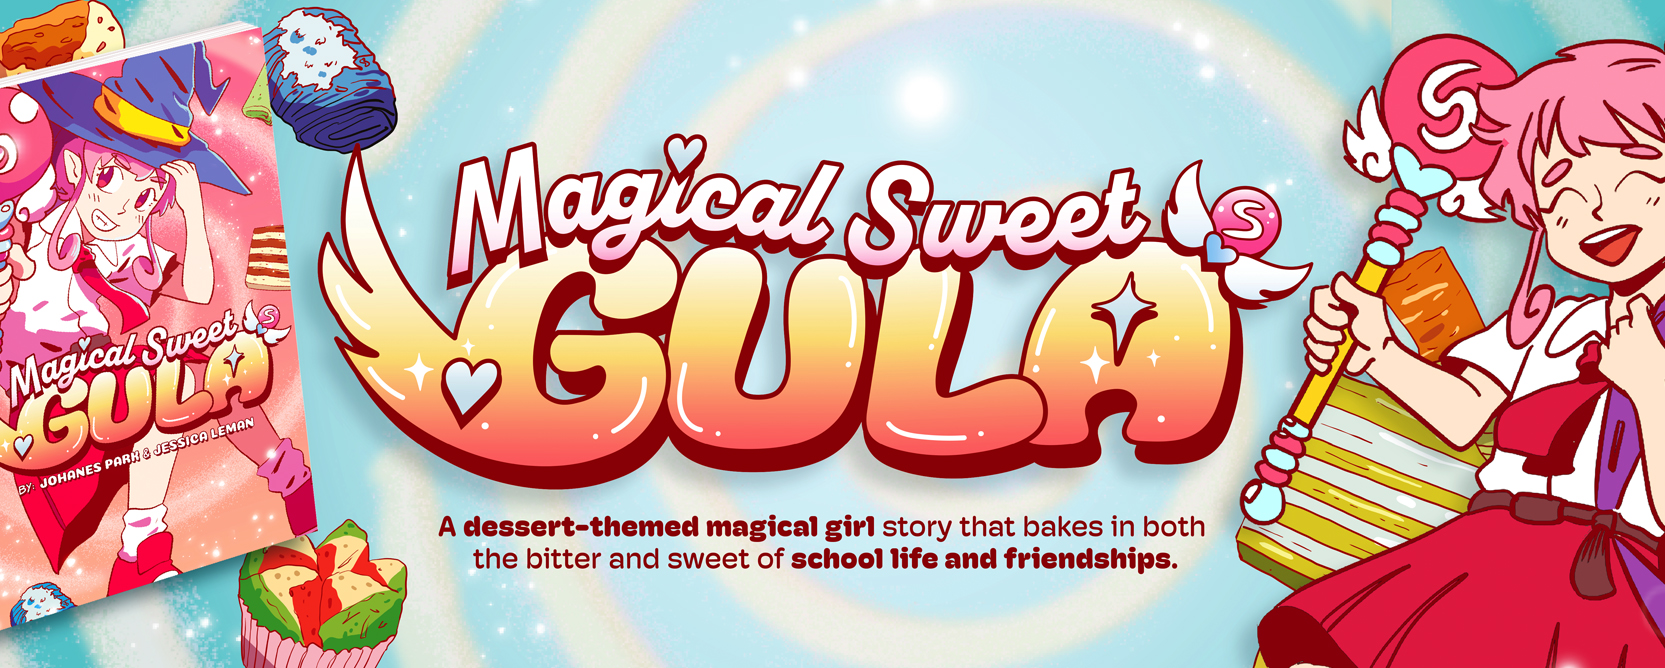 Magical Sweet Gula: Gula Gulali discovers that variety is not the of life at school where her magic makes for sour grapes